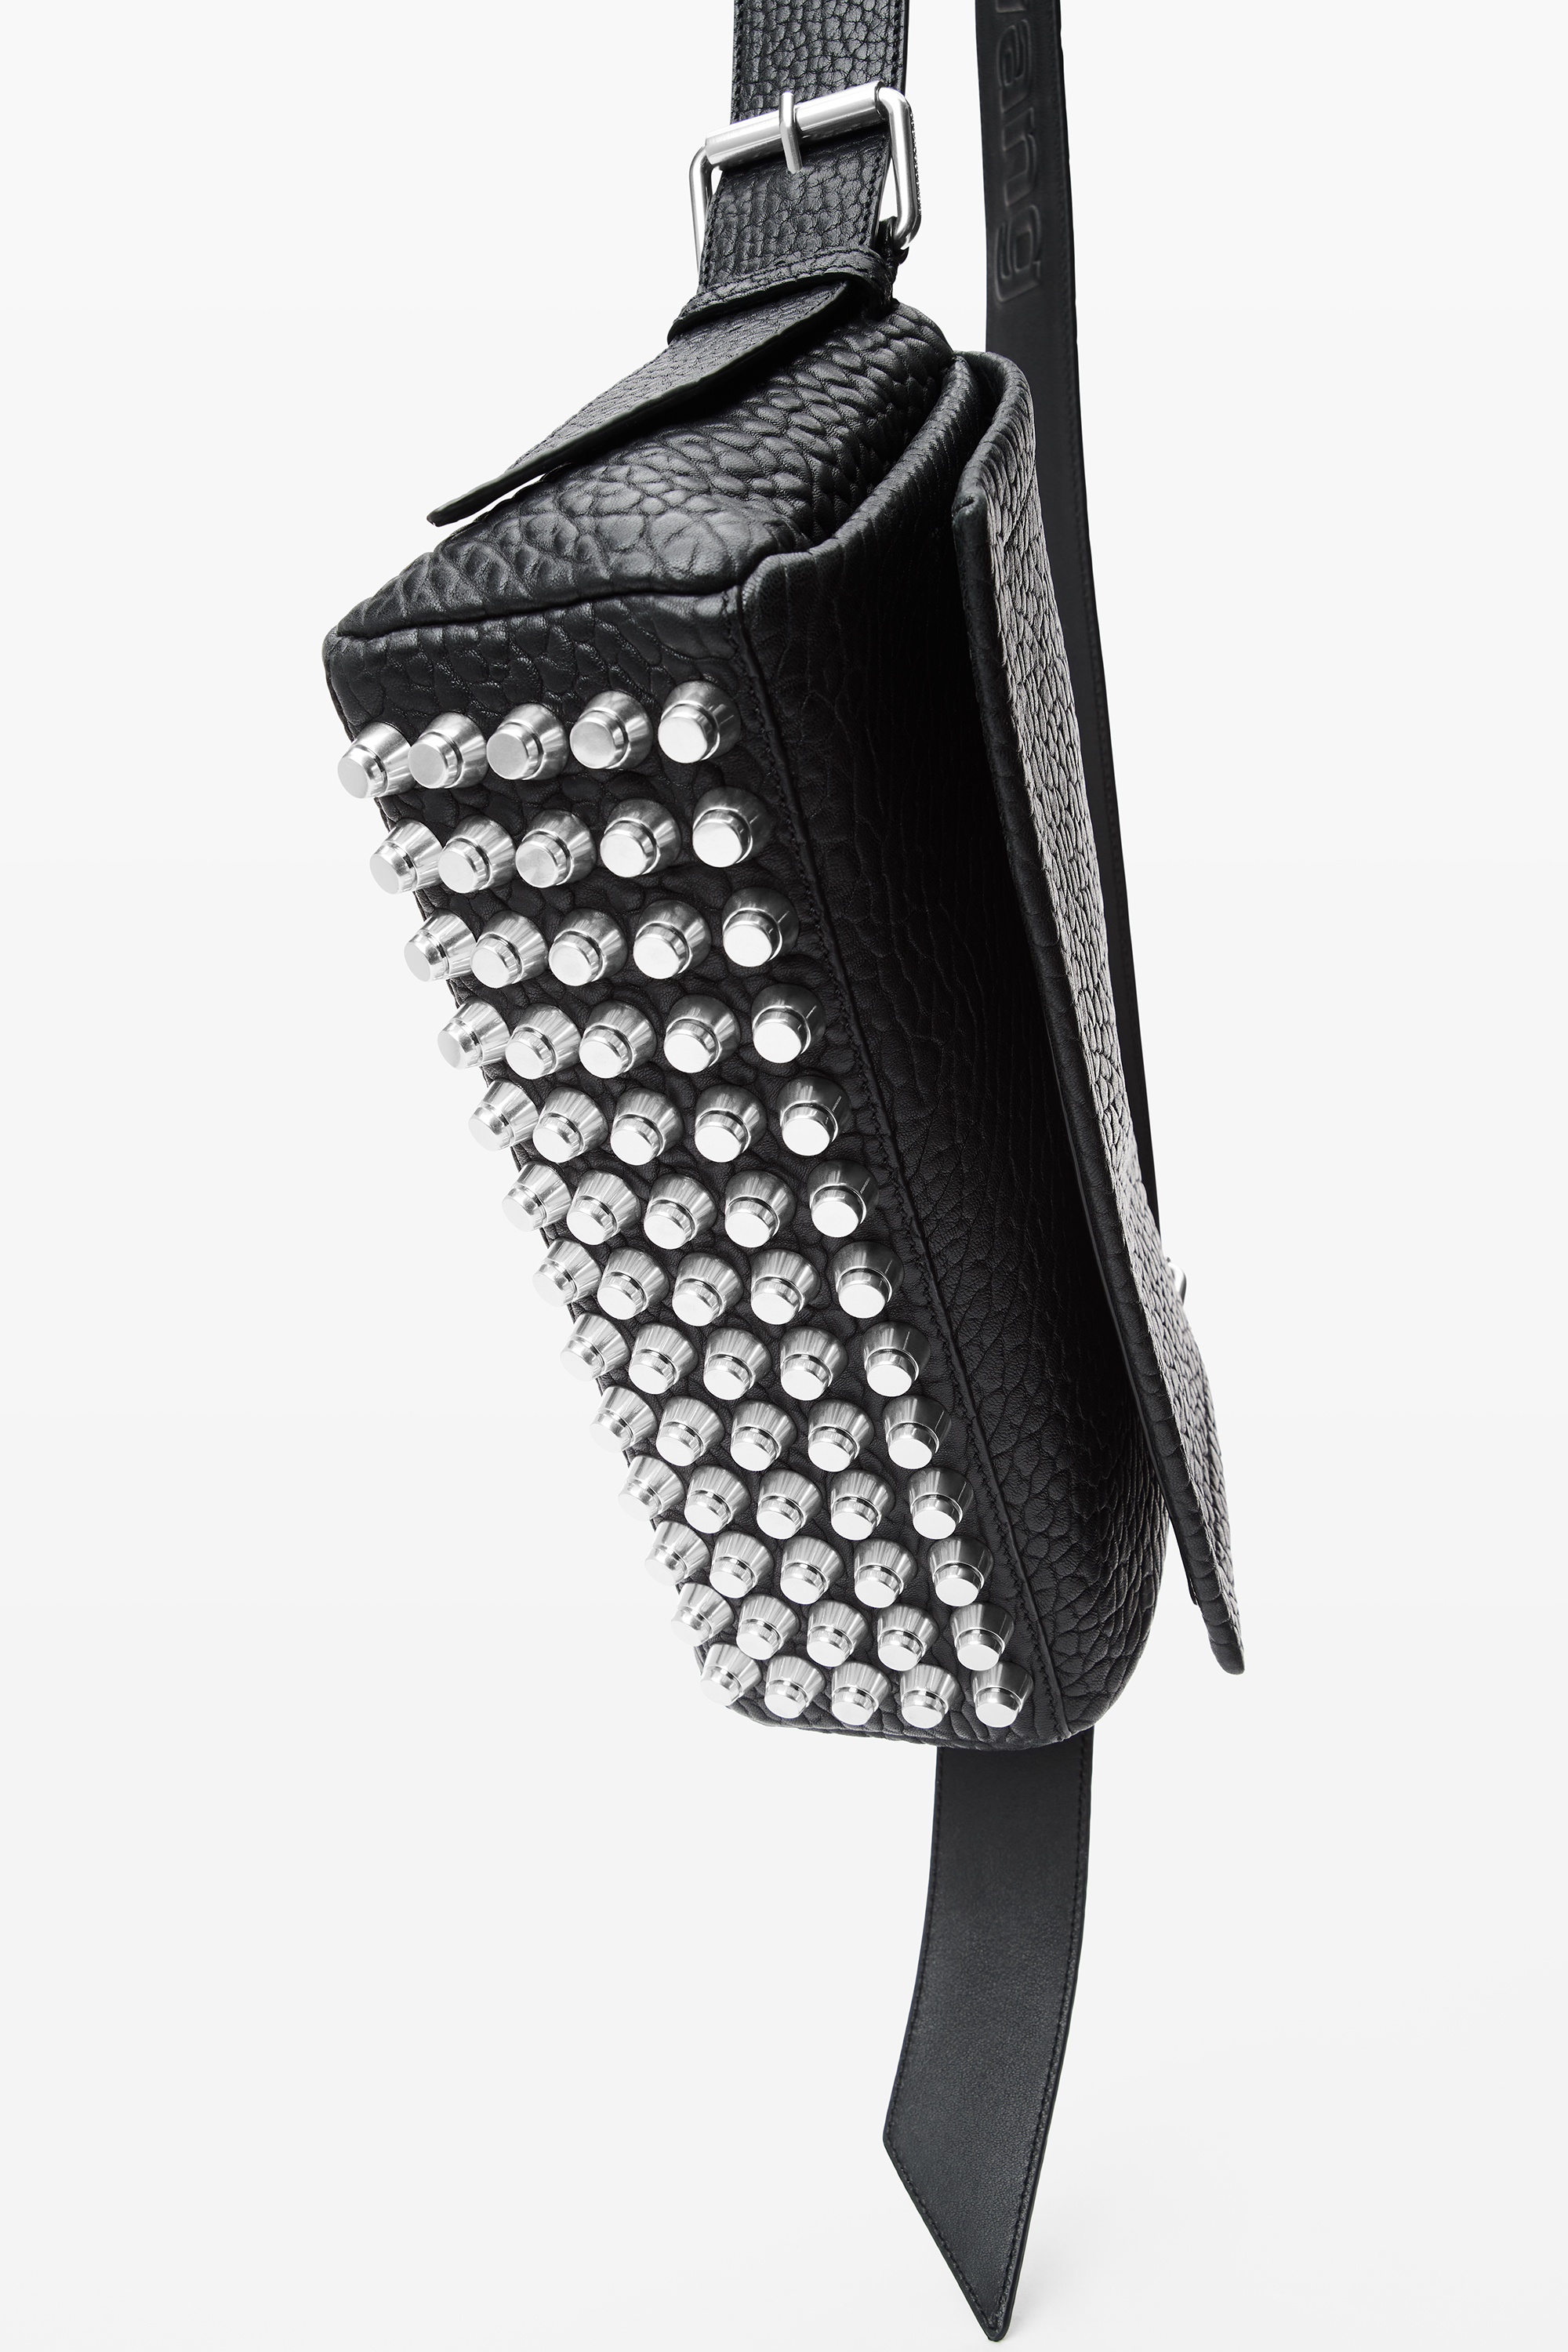 A black textured crossbody bag adorned with multiple rows of silver studs